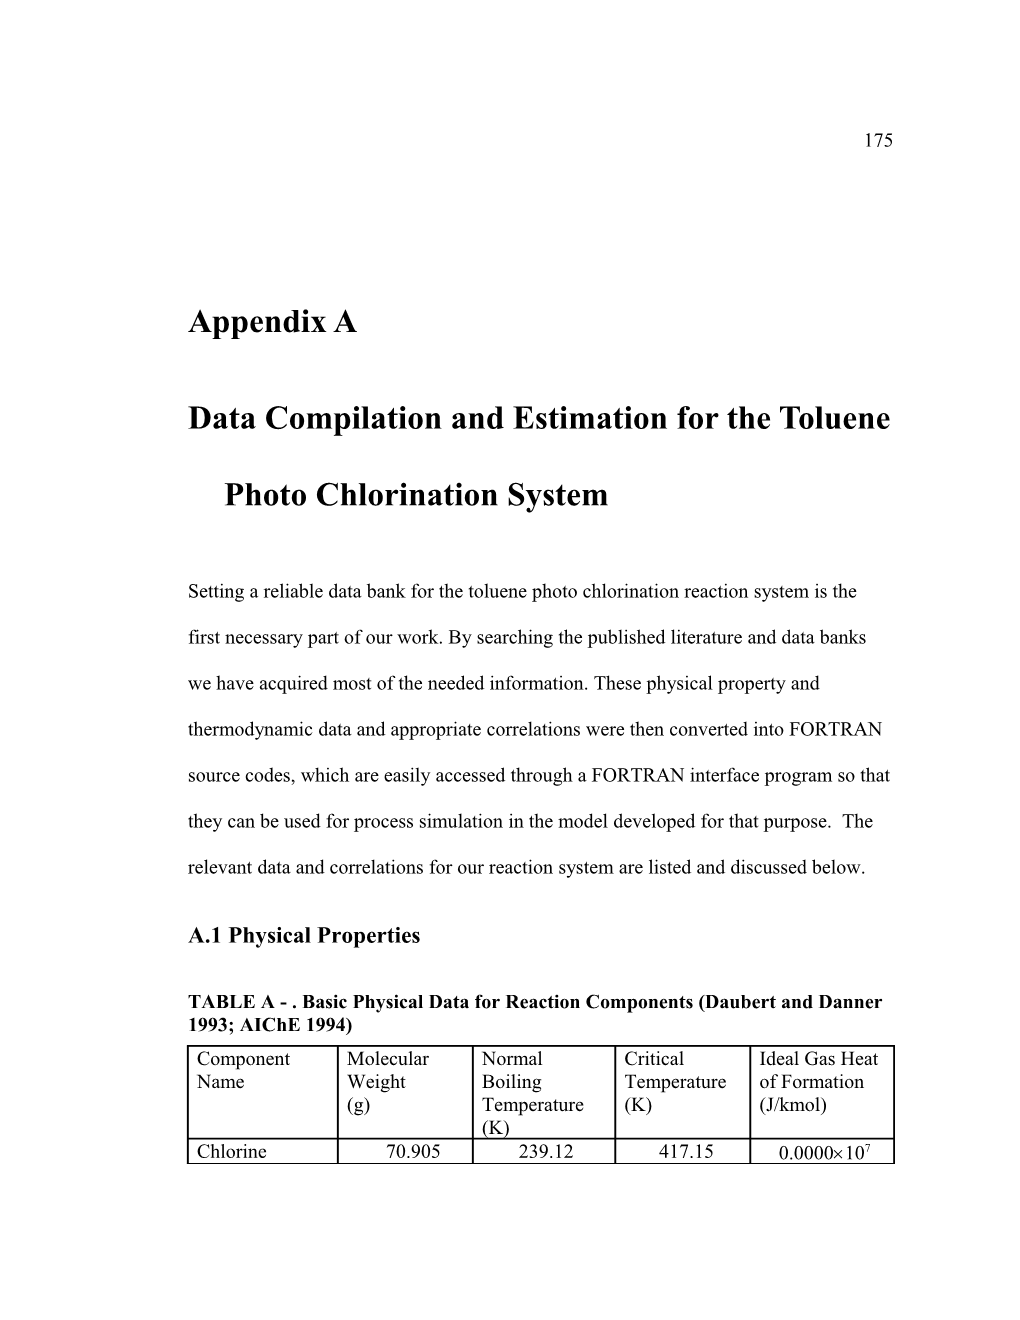 Data Compilation and Estimation for the Toluene Photo Chlorination System